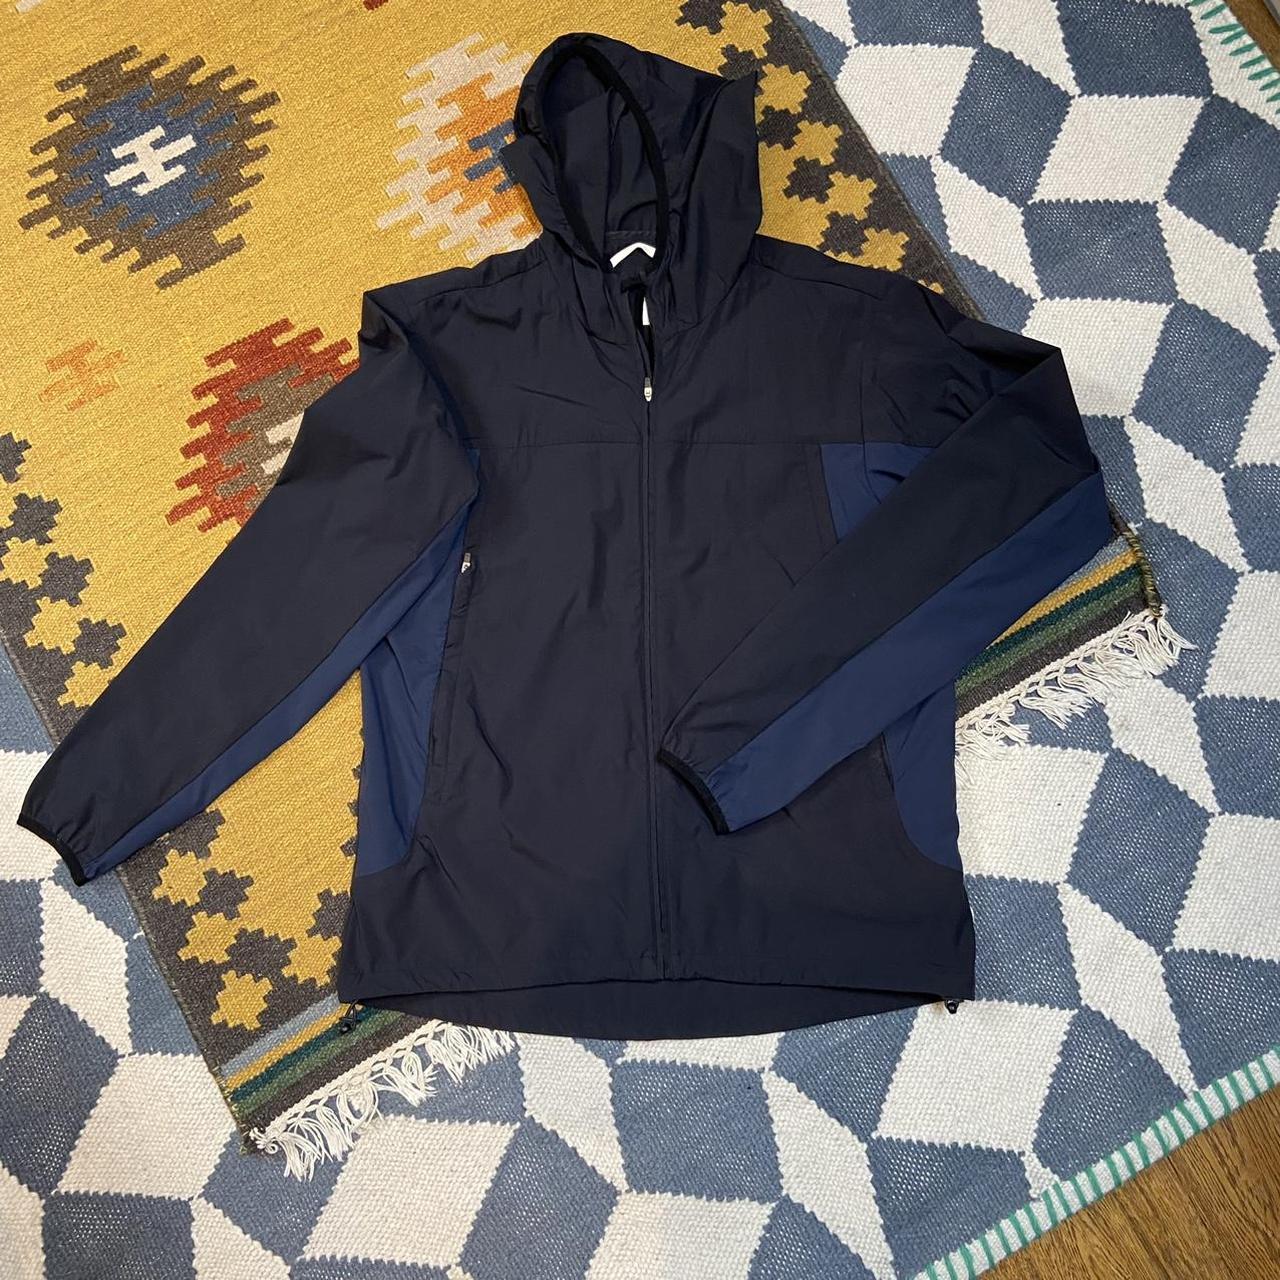 Norse Projects Running Jacket in Black/Navy. Great... - Depop